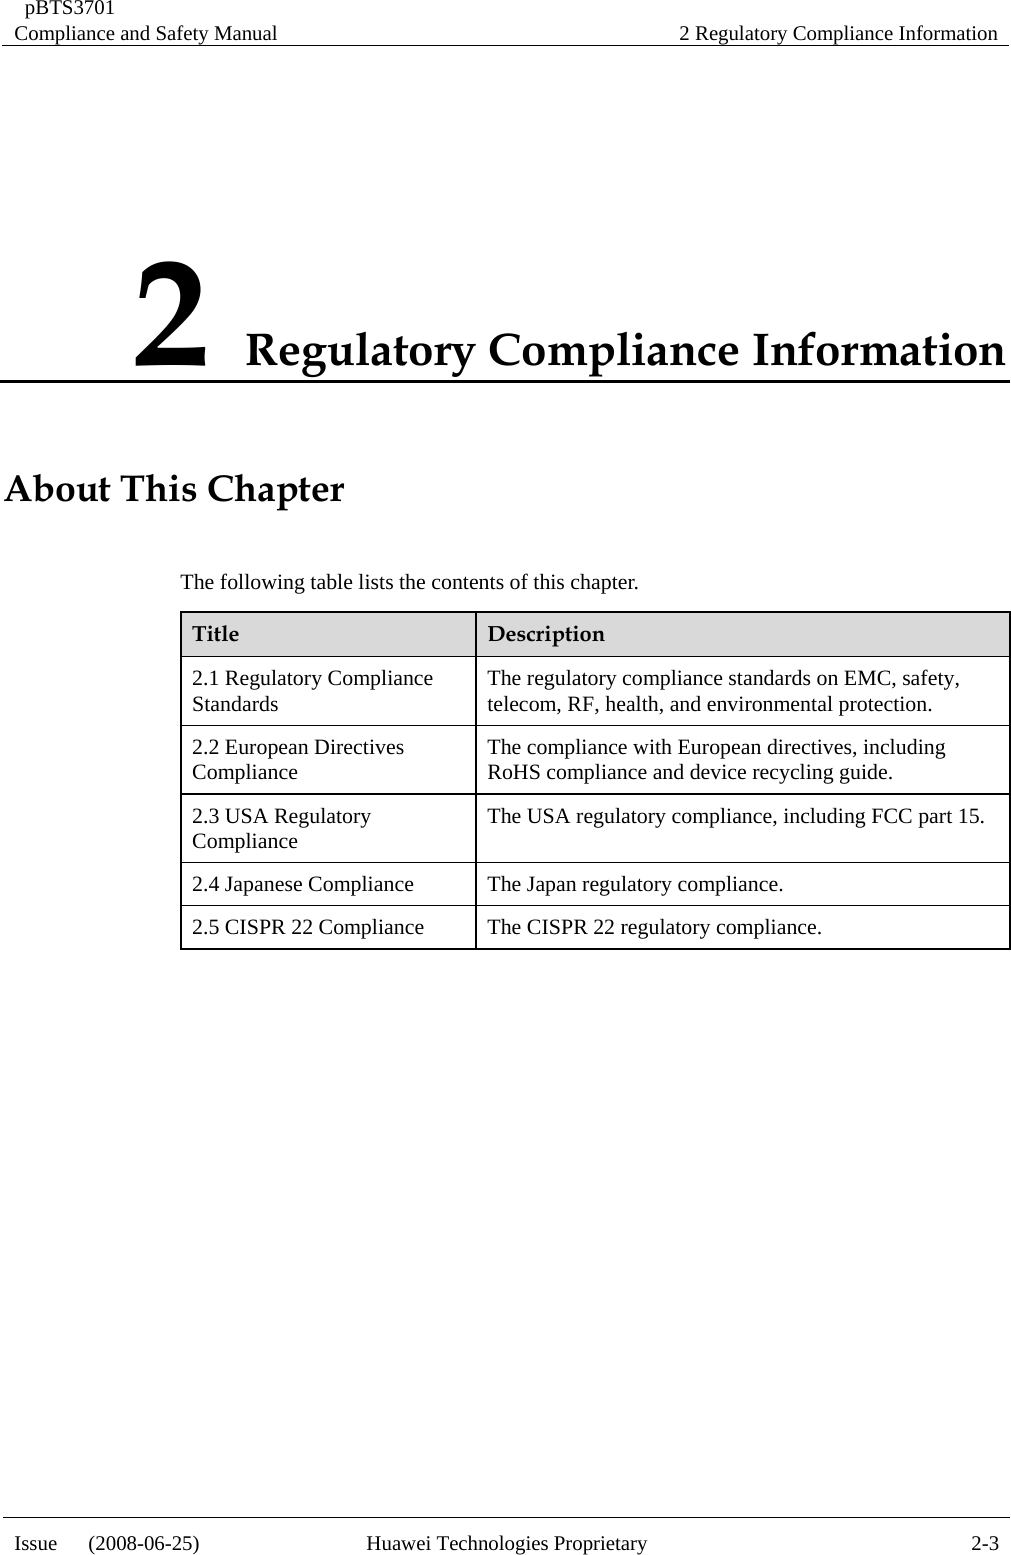  pBTS3701 Compliance and Safety Manual  2 Regulatory Compliance Information Issue   (2008-06-25)  Huawei Technologies Proprietary  2-32 Regulatory Compliance Information About ThiT ntens Chapter he following table lists the co ts of this chapter. Title  Description 2.1 Regulatory Compliance  safety, Standards The regulatory compliance standards on EMC, telecom, RF, health, and environmental protection. 2.2 European Directives  The compliance with European directives, including ling guide. Compliance RoHS compliance and device recyc2.3 USA Regulatory Compliance The USA regulatory compliance, including FCC part 15. 2.4 Japanese Compliance The Japan regulatory compliance. 2.5 CISPR 22 Compliance The CISPR 22 regulatory compliance.   